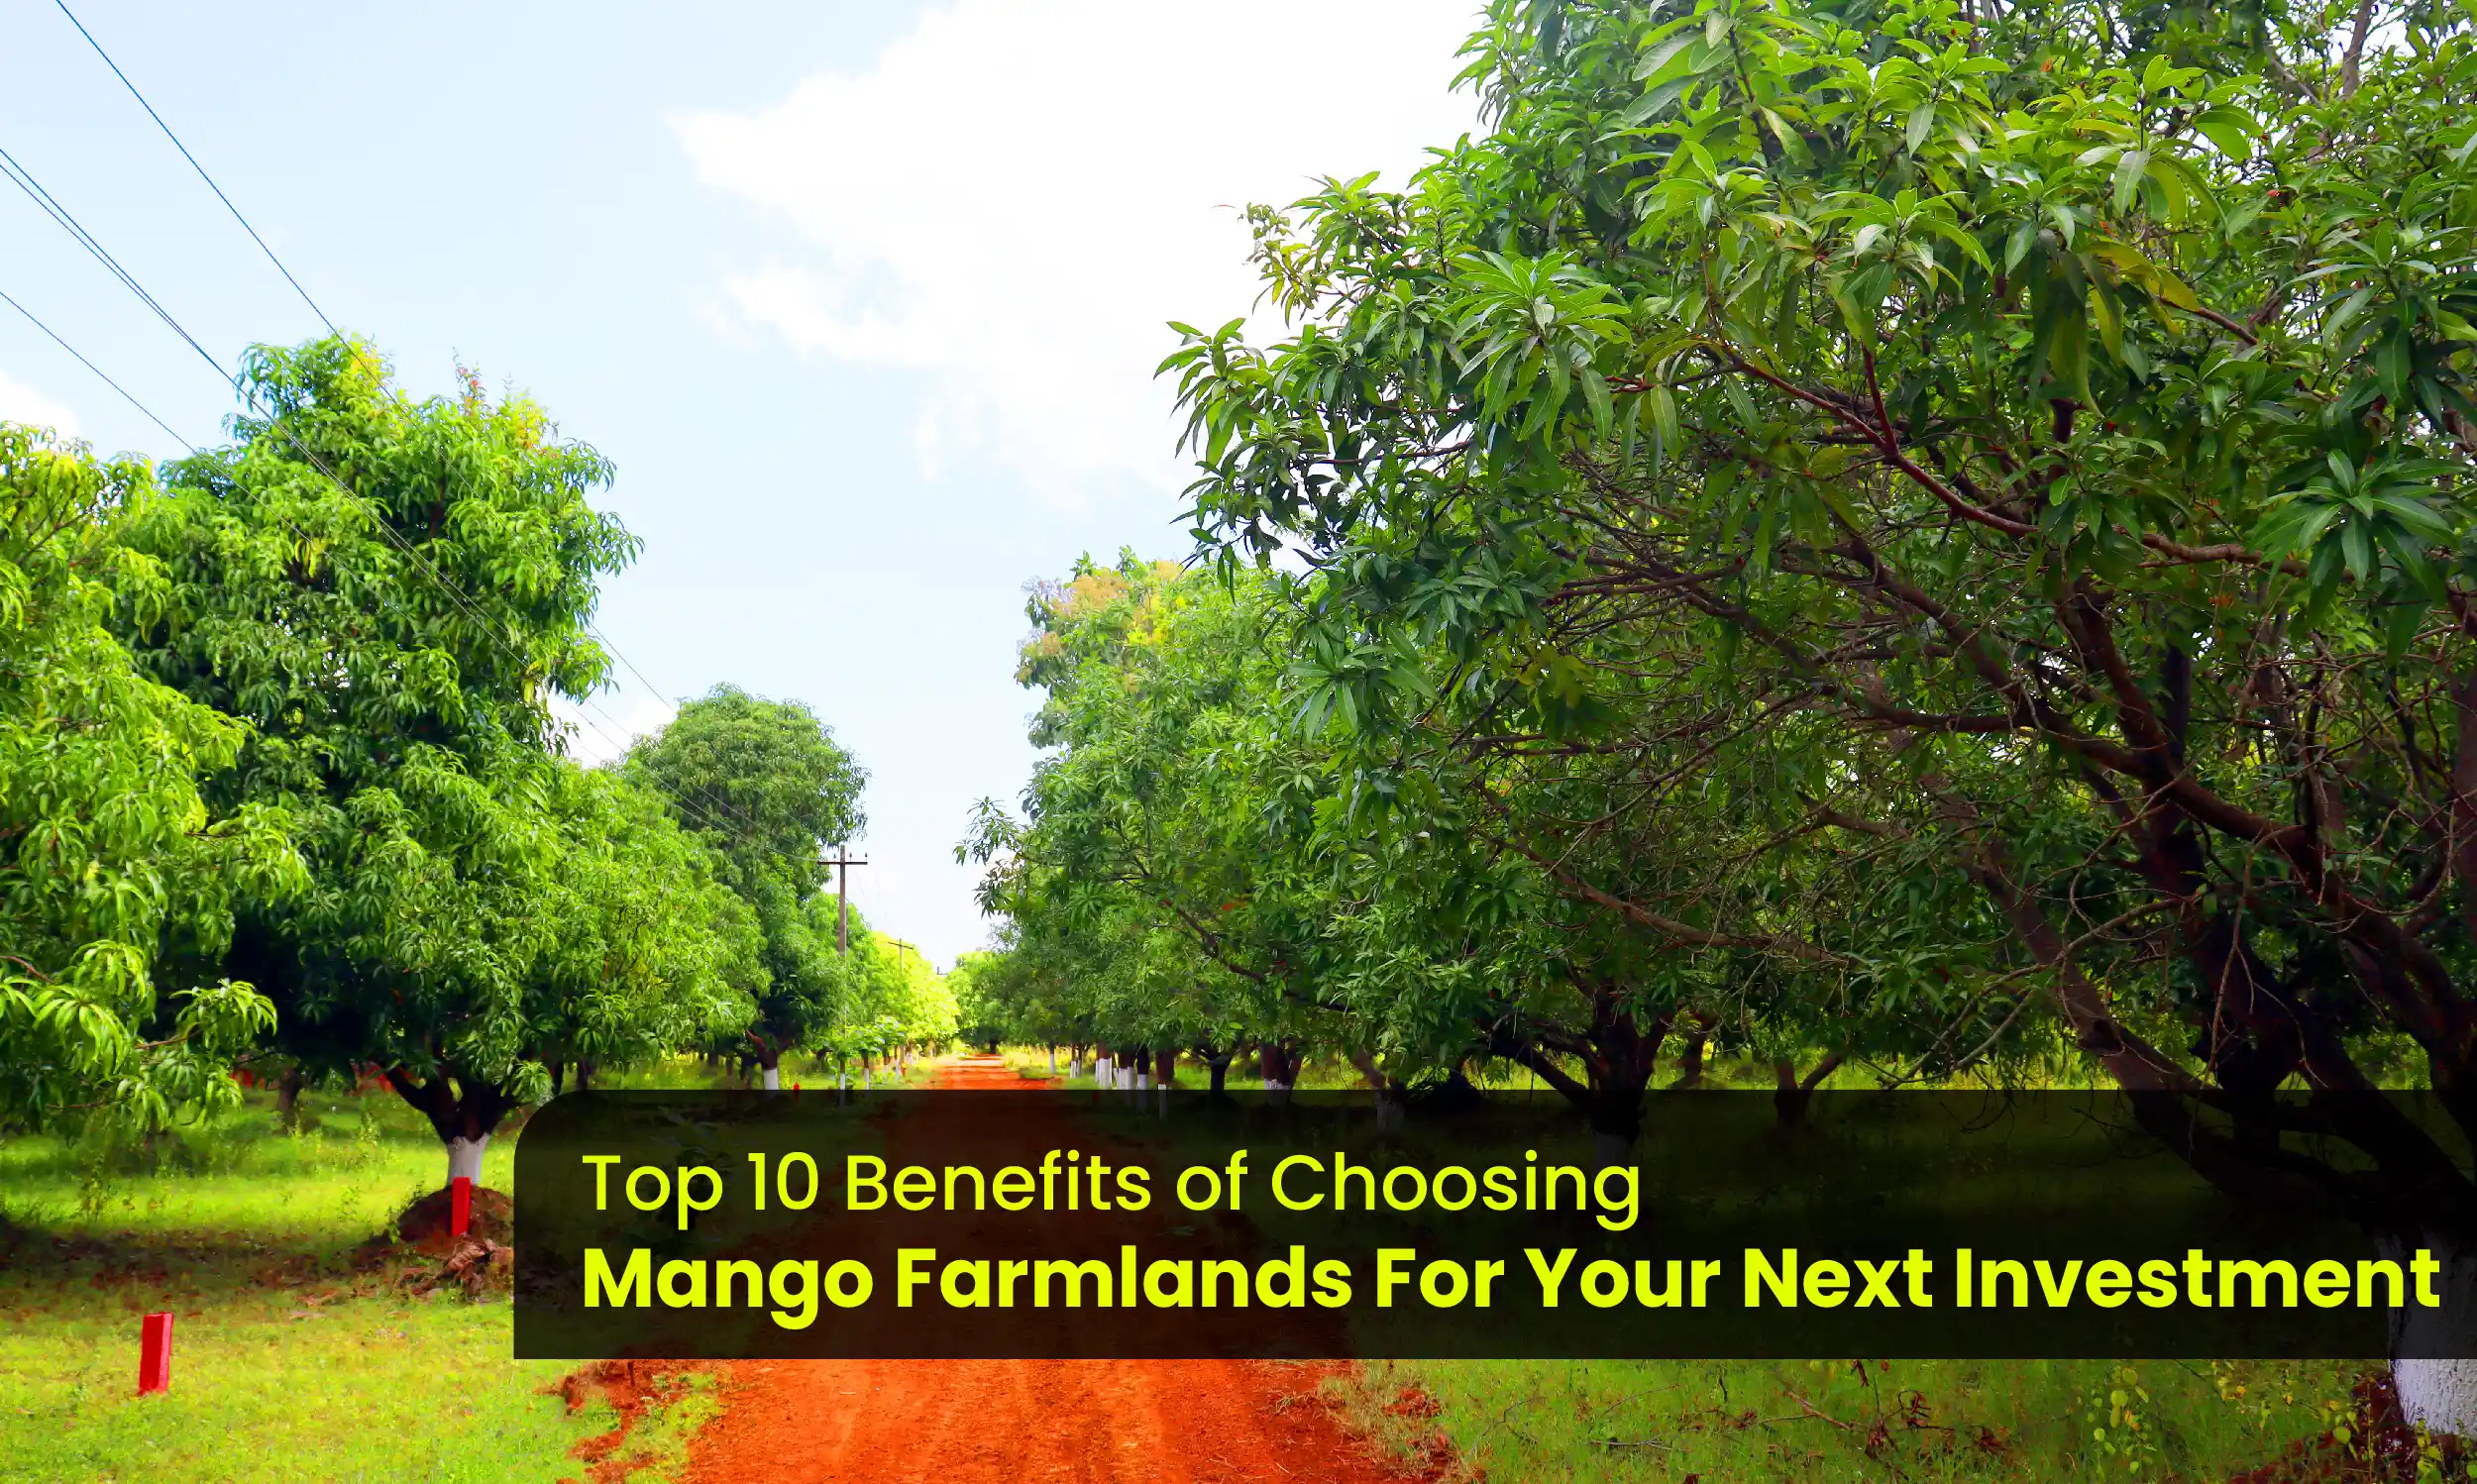 Top 10 Reasons to Make Mango Farmlands Your Next Investment